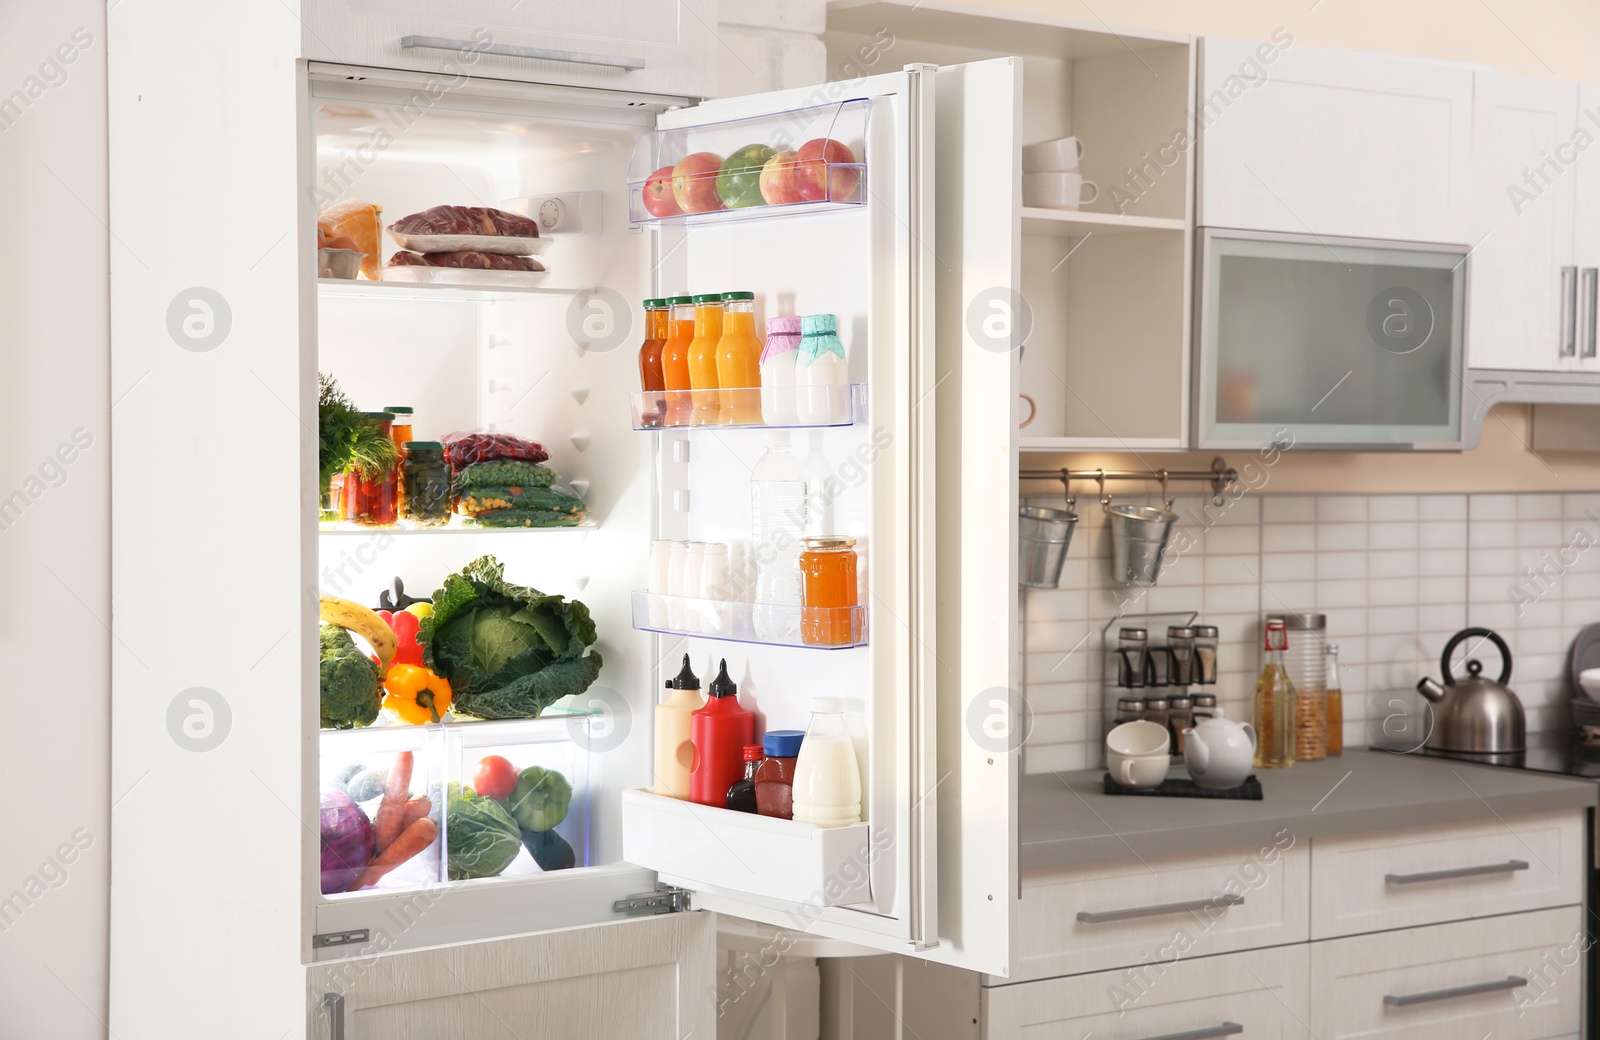 Photo of Stylish kitchen interior with refrigerator full of products